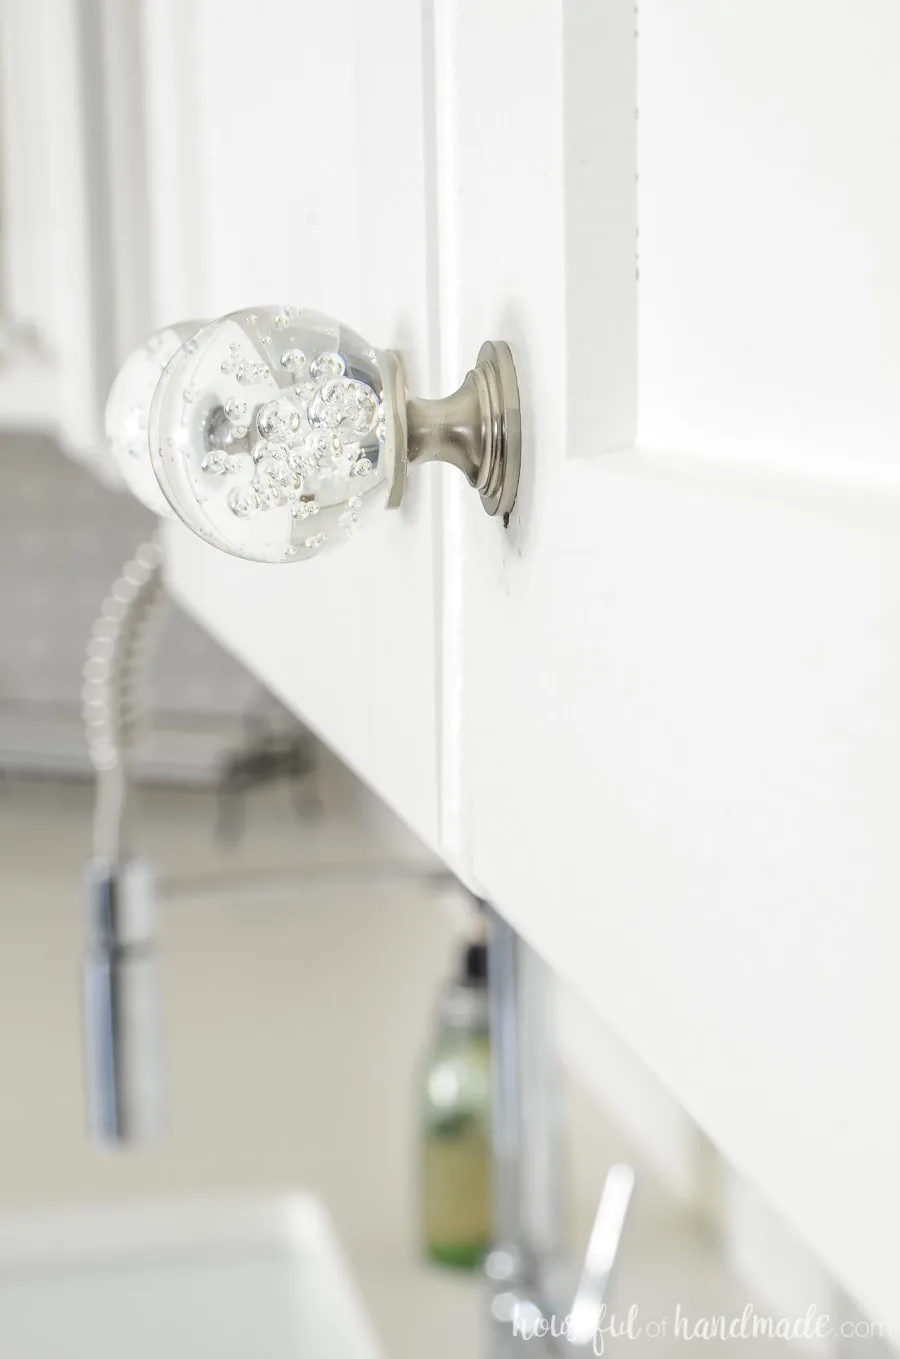 Add a little glam to your kitchen with these bubble glass knobs. The bubbles add sparkle to a modern farmhouse kitchen. Housefulofhandmade.com